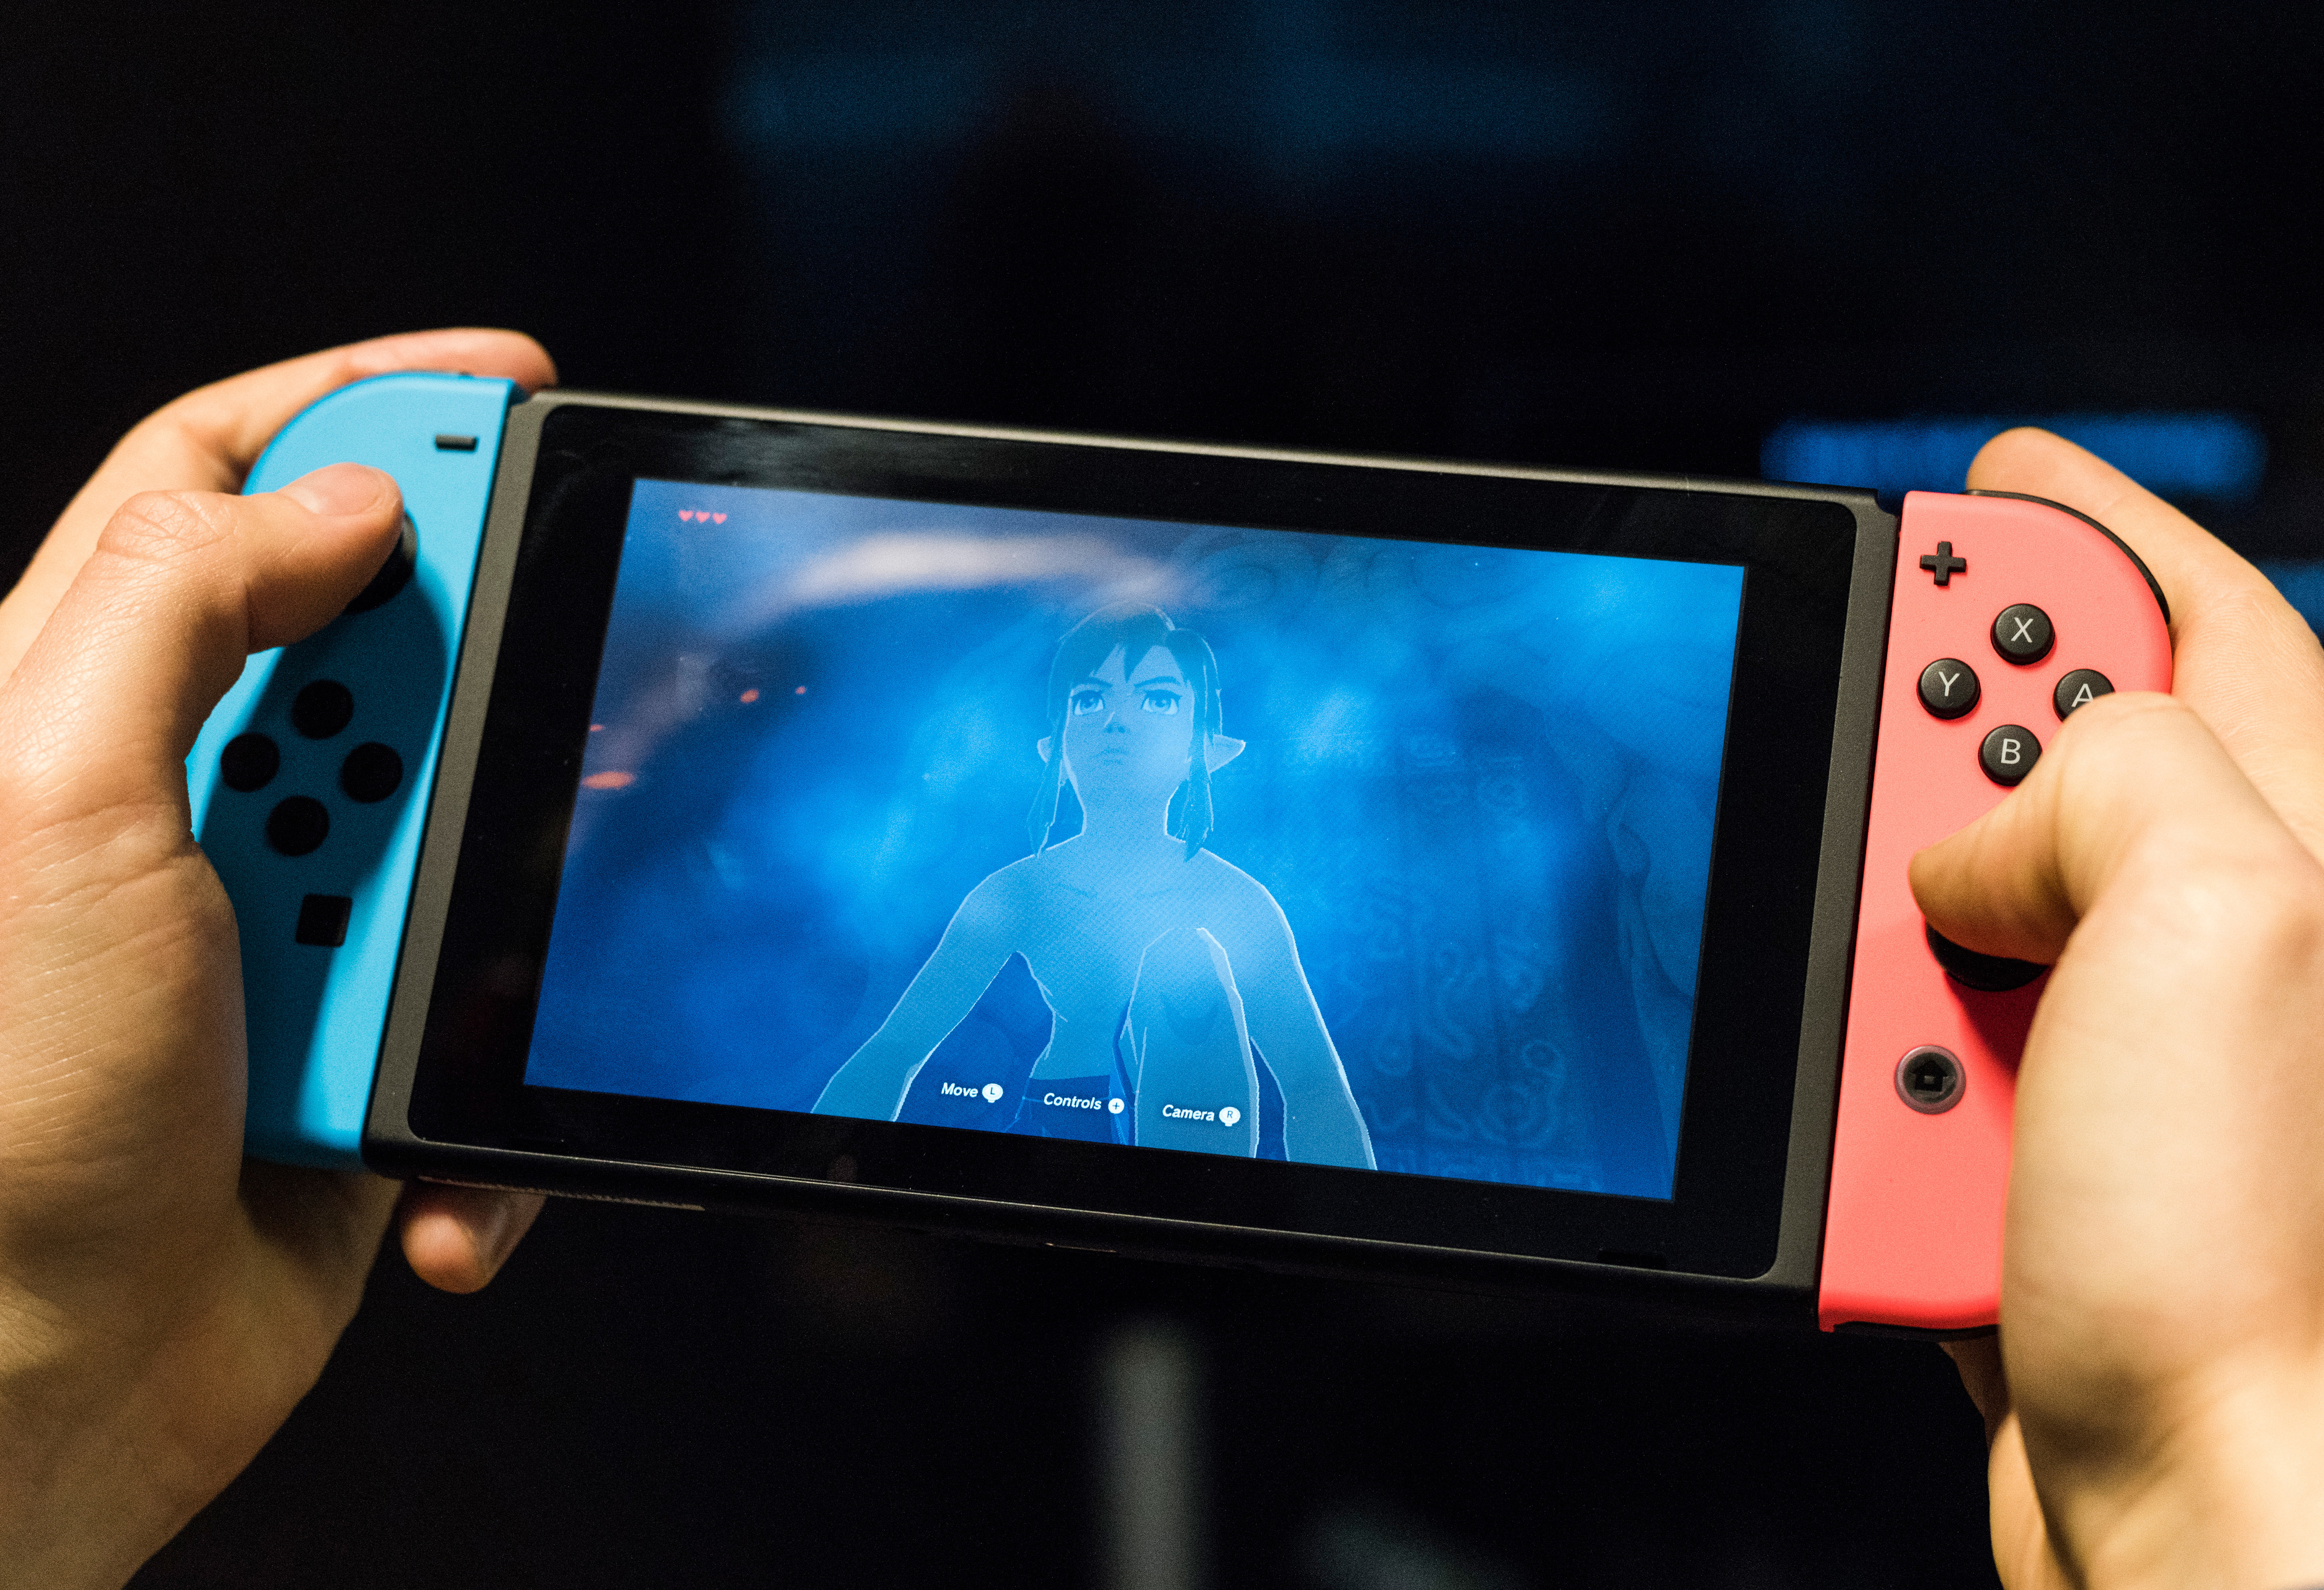 A man playing the Nintendo Switch in Berlin, Germany, 01 March 2017. Photo: Christophe Gateau/dpa | usage worldwide (Photo by Christophe Gateau/picture alliance via Getty Images)